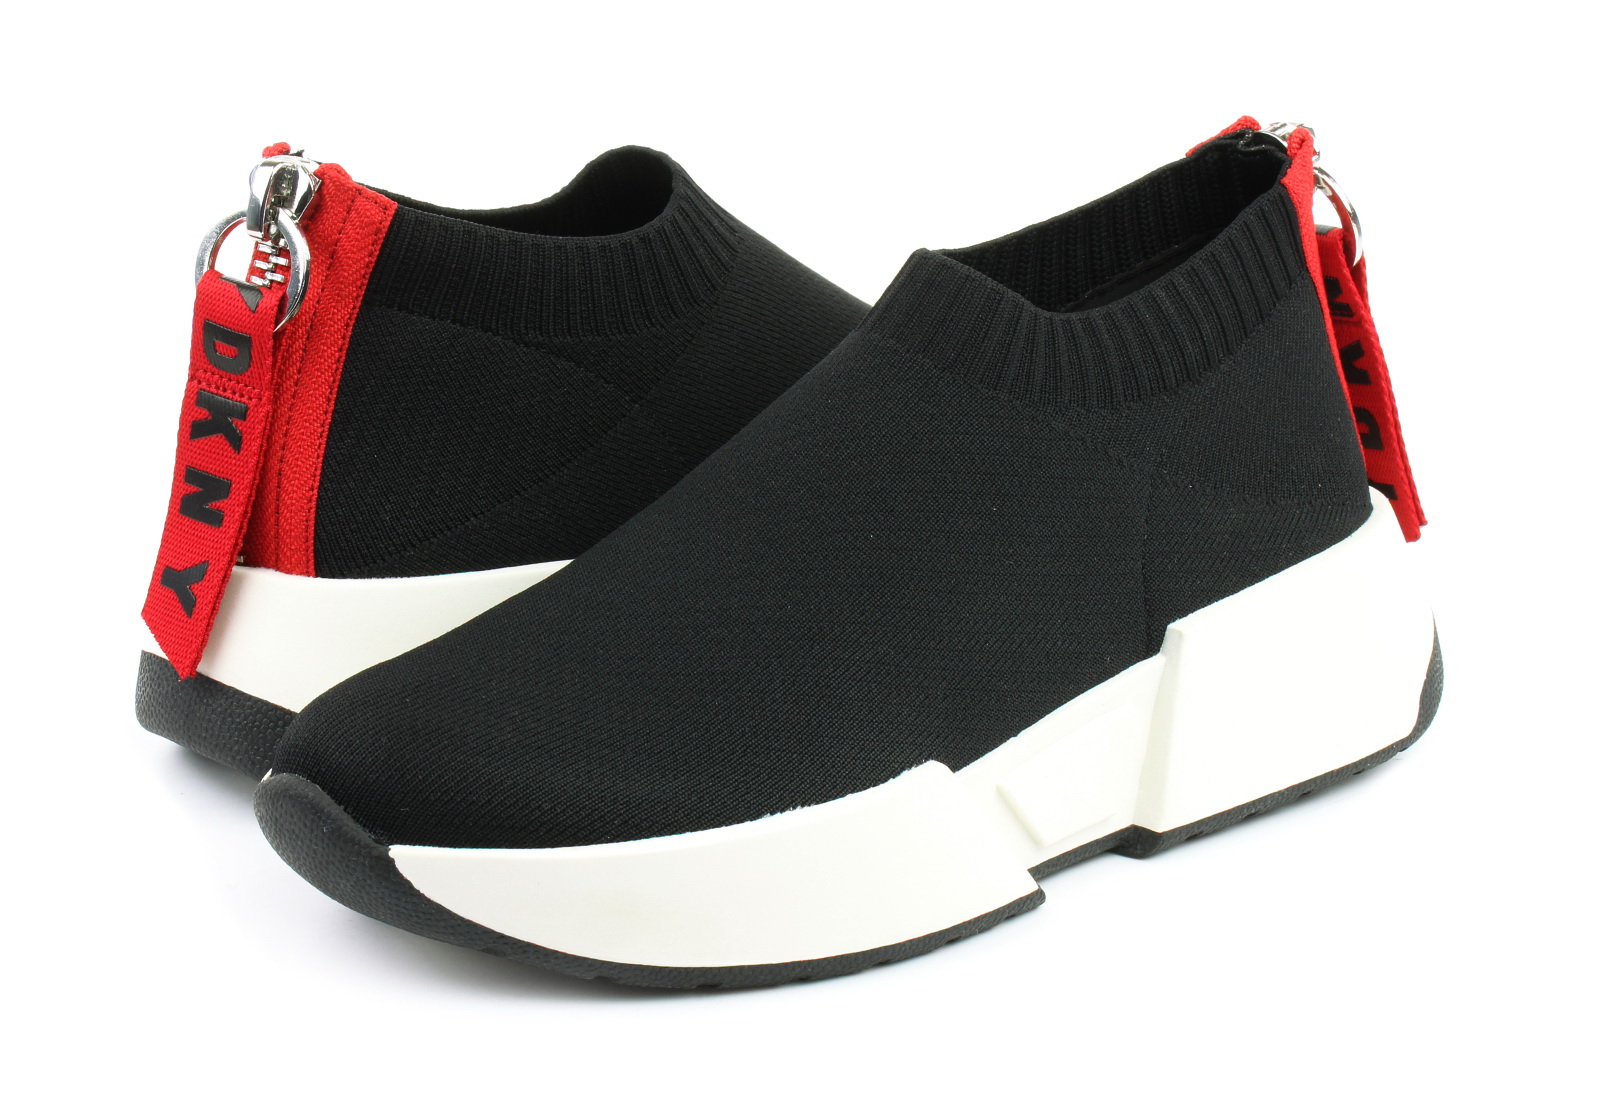 Roman Thank you for your help George Hanbury DKNY Slip-on - Marcel - Slip On Sneaker - K2930012-BLK - Office Shoes  Romania